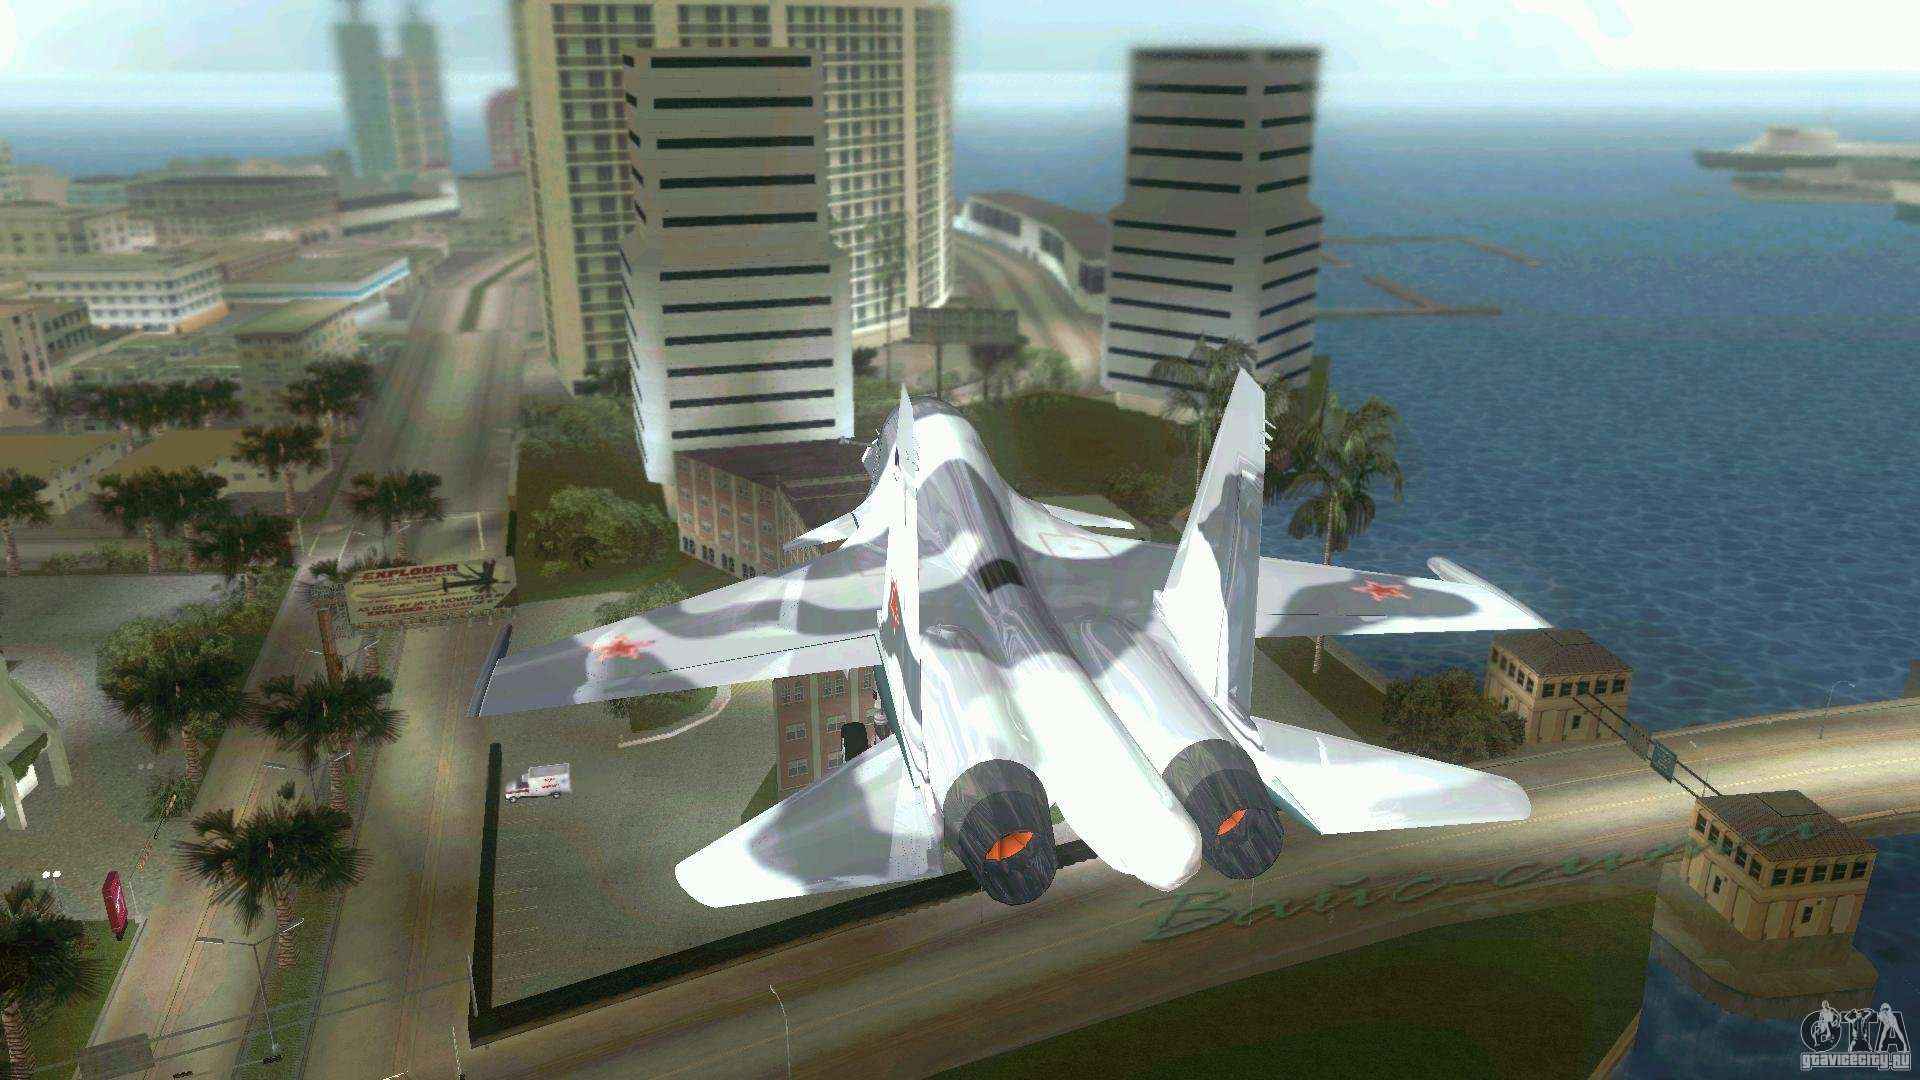 Vice City Air Force for GTA Vice City